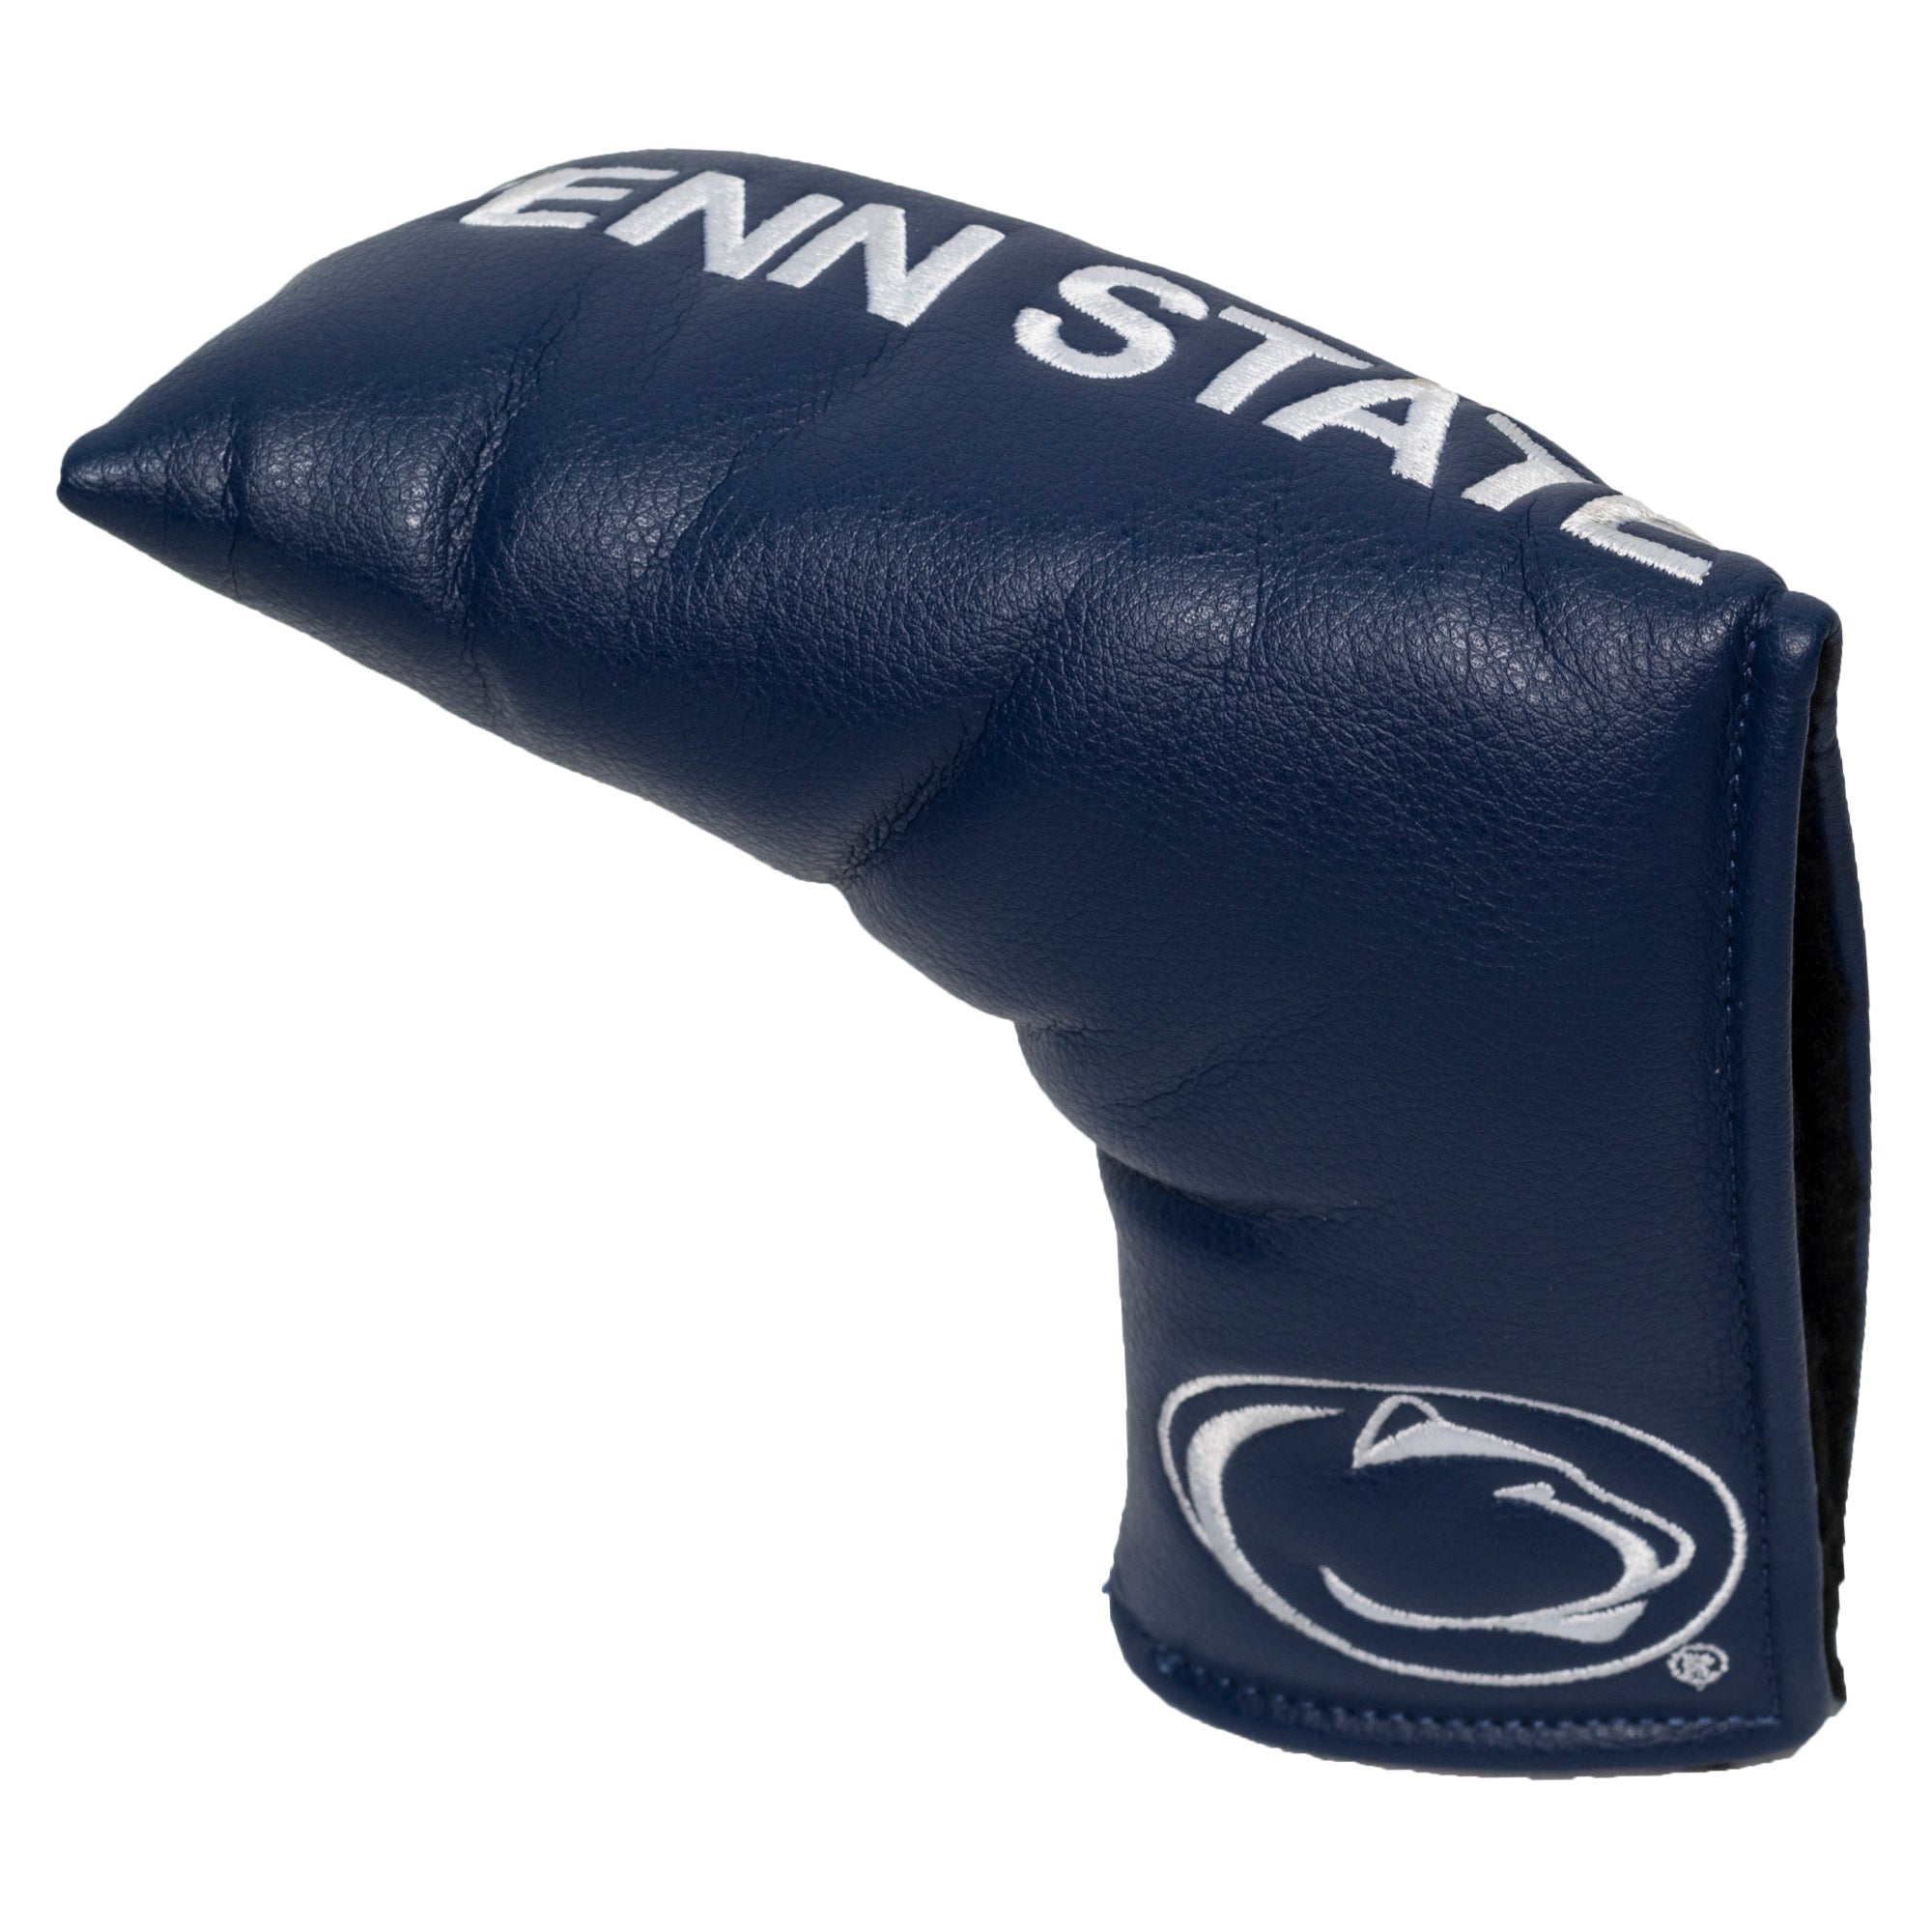 Penn State Nittany Lions Tour Blade Putter Cover